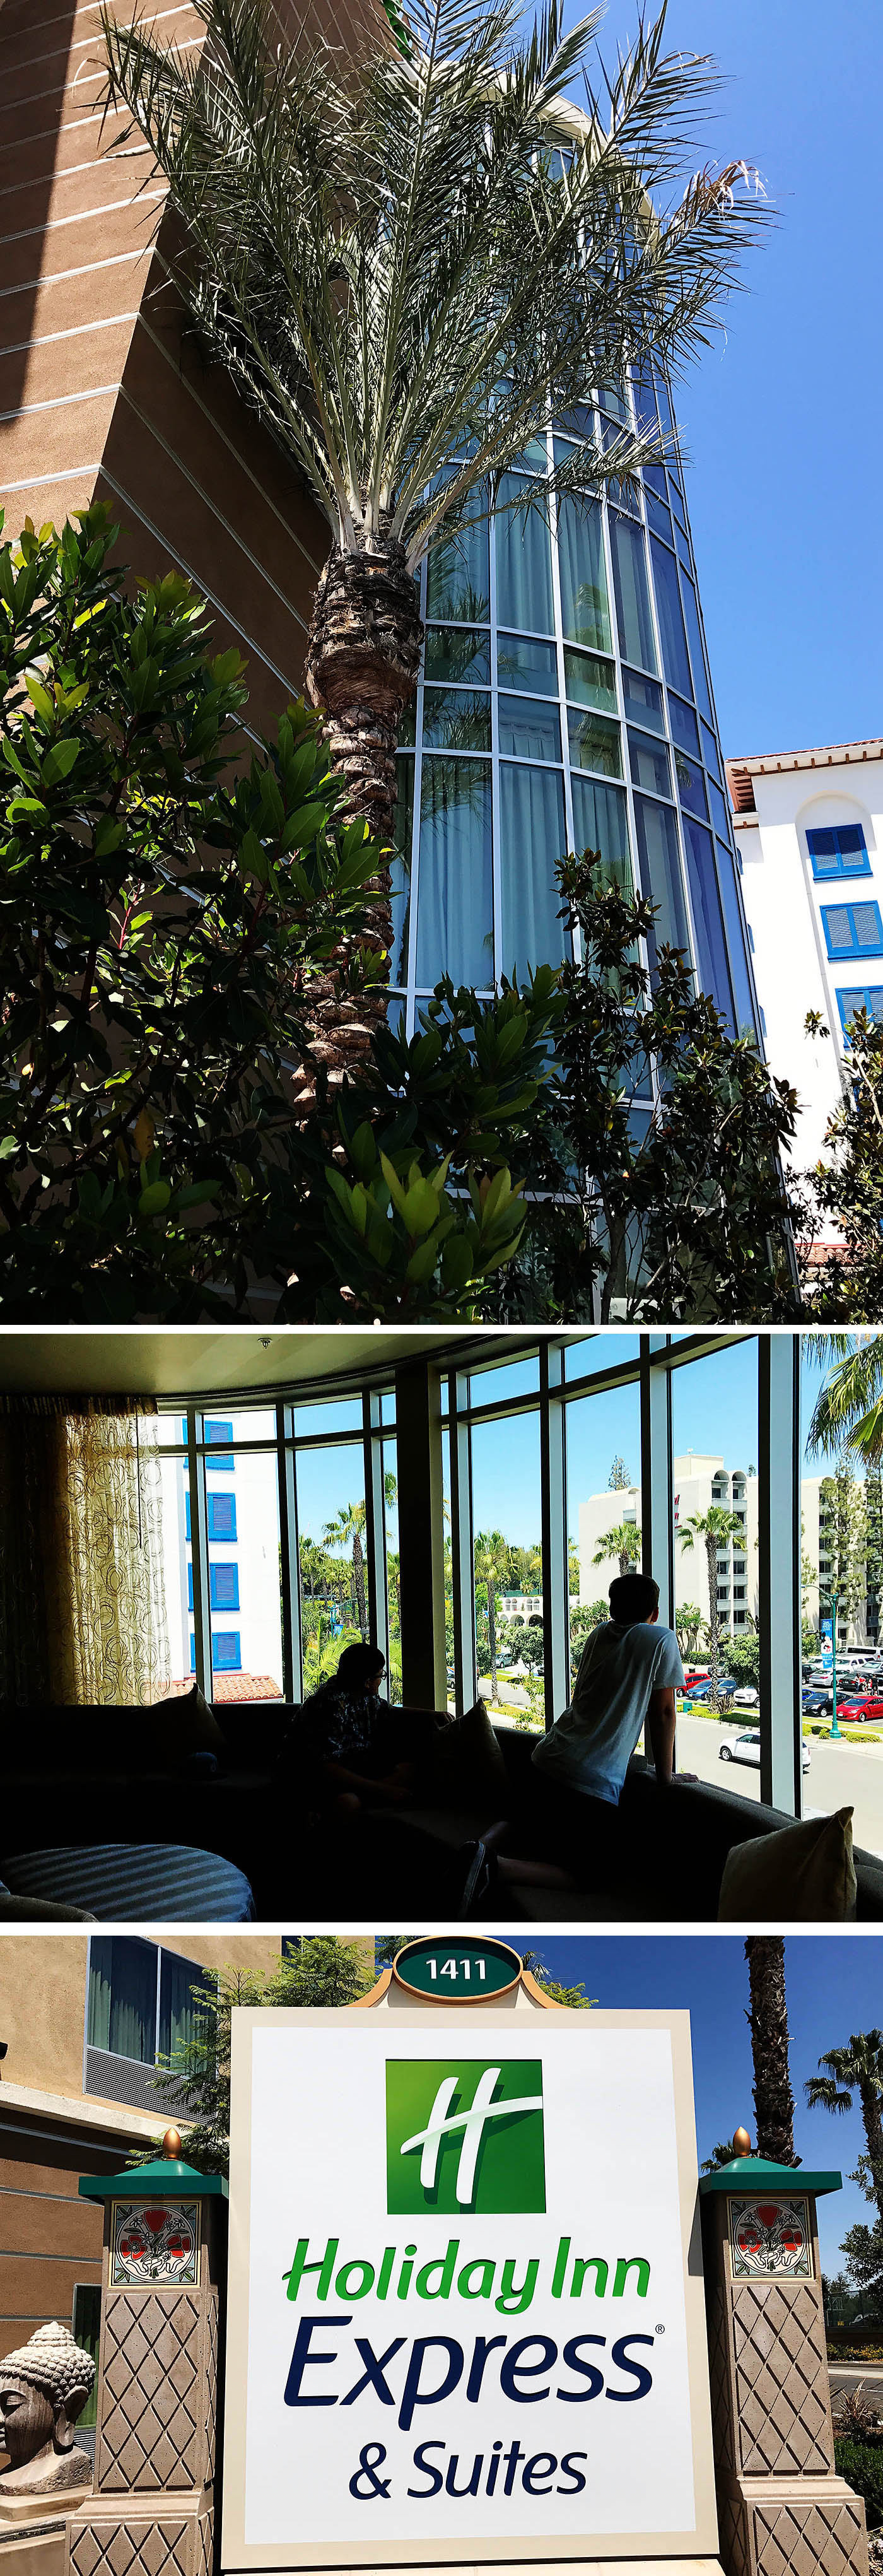 Review of Holiday Inn Express & Suites Anaheim Resort area - a great hotel option within walking distance to Disneyland